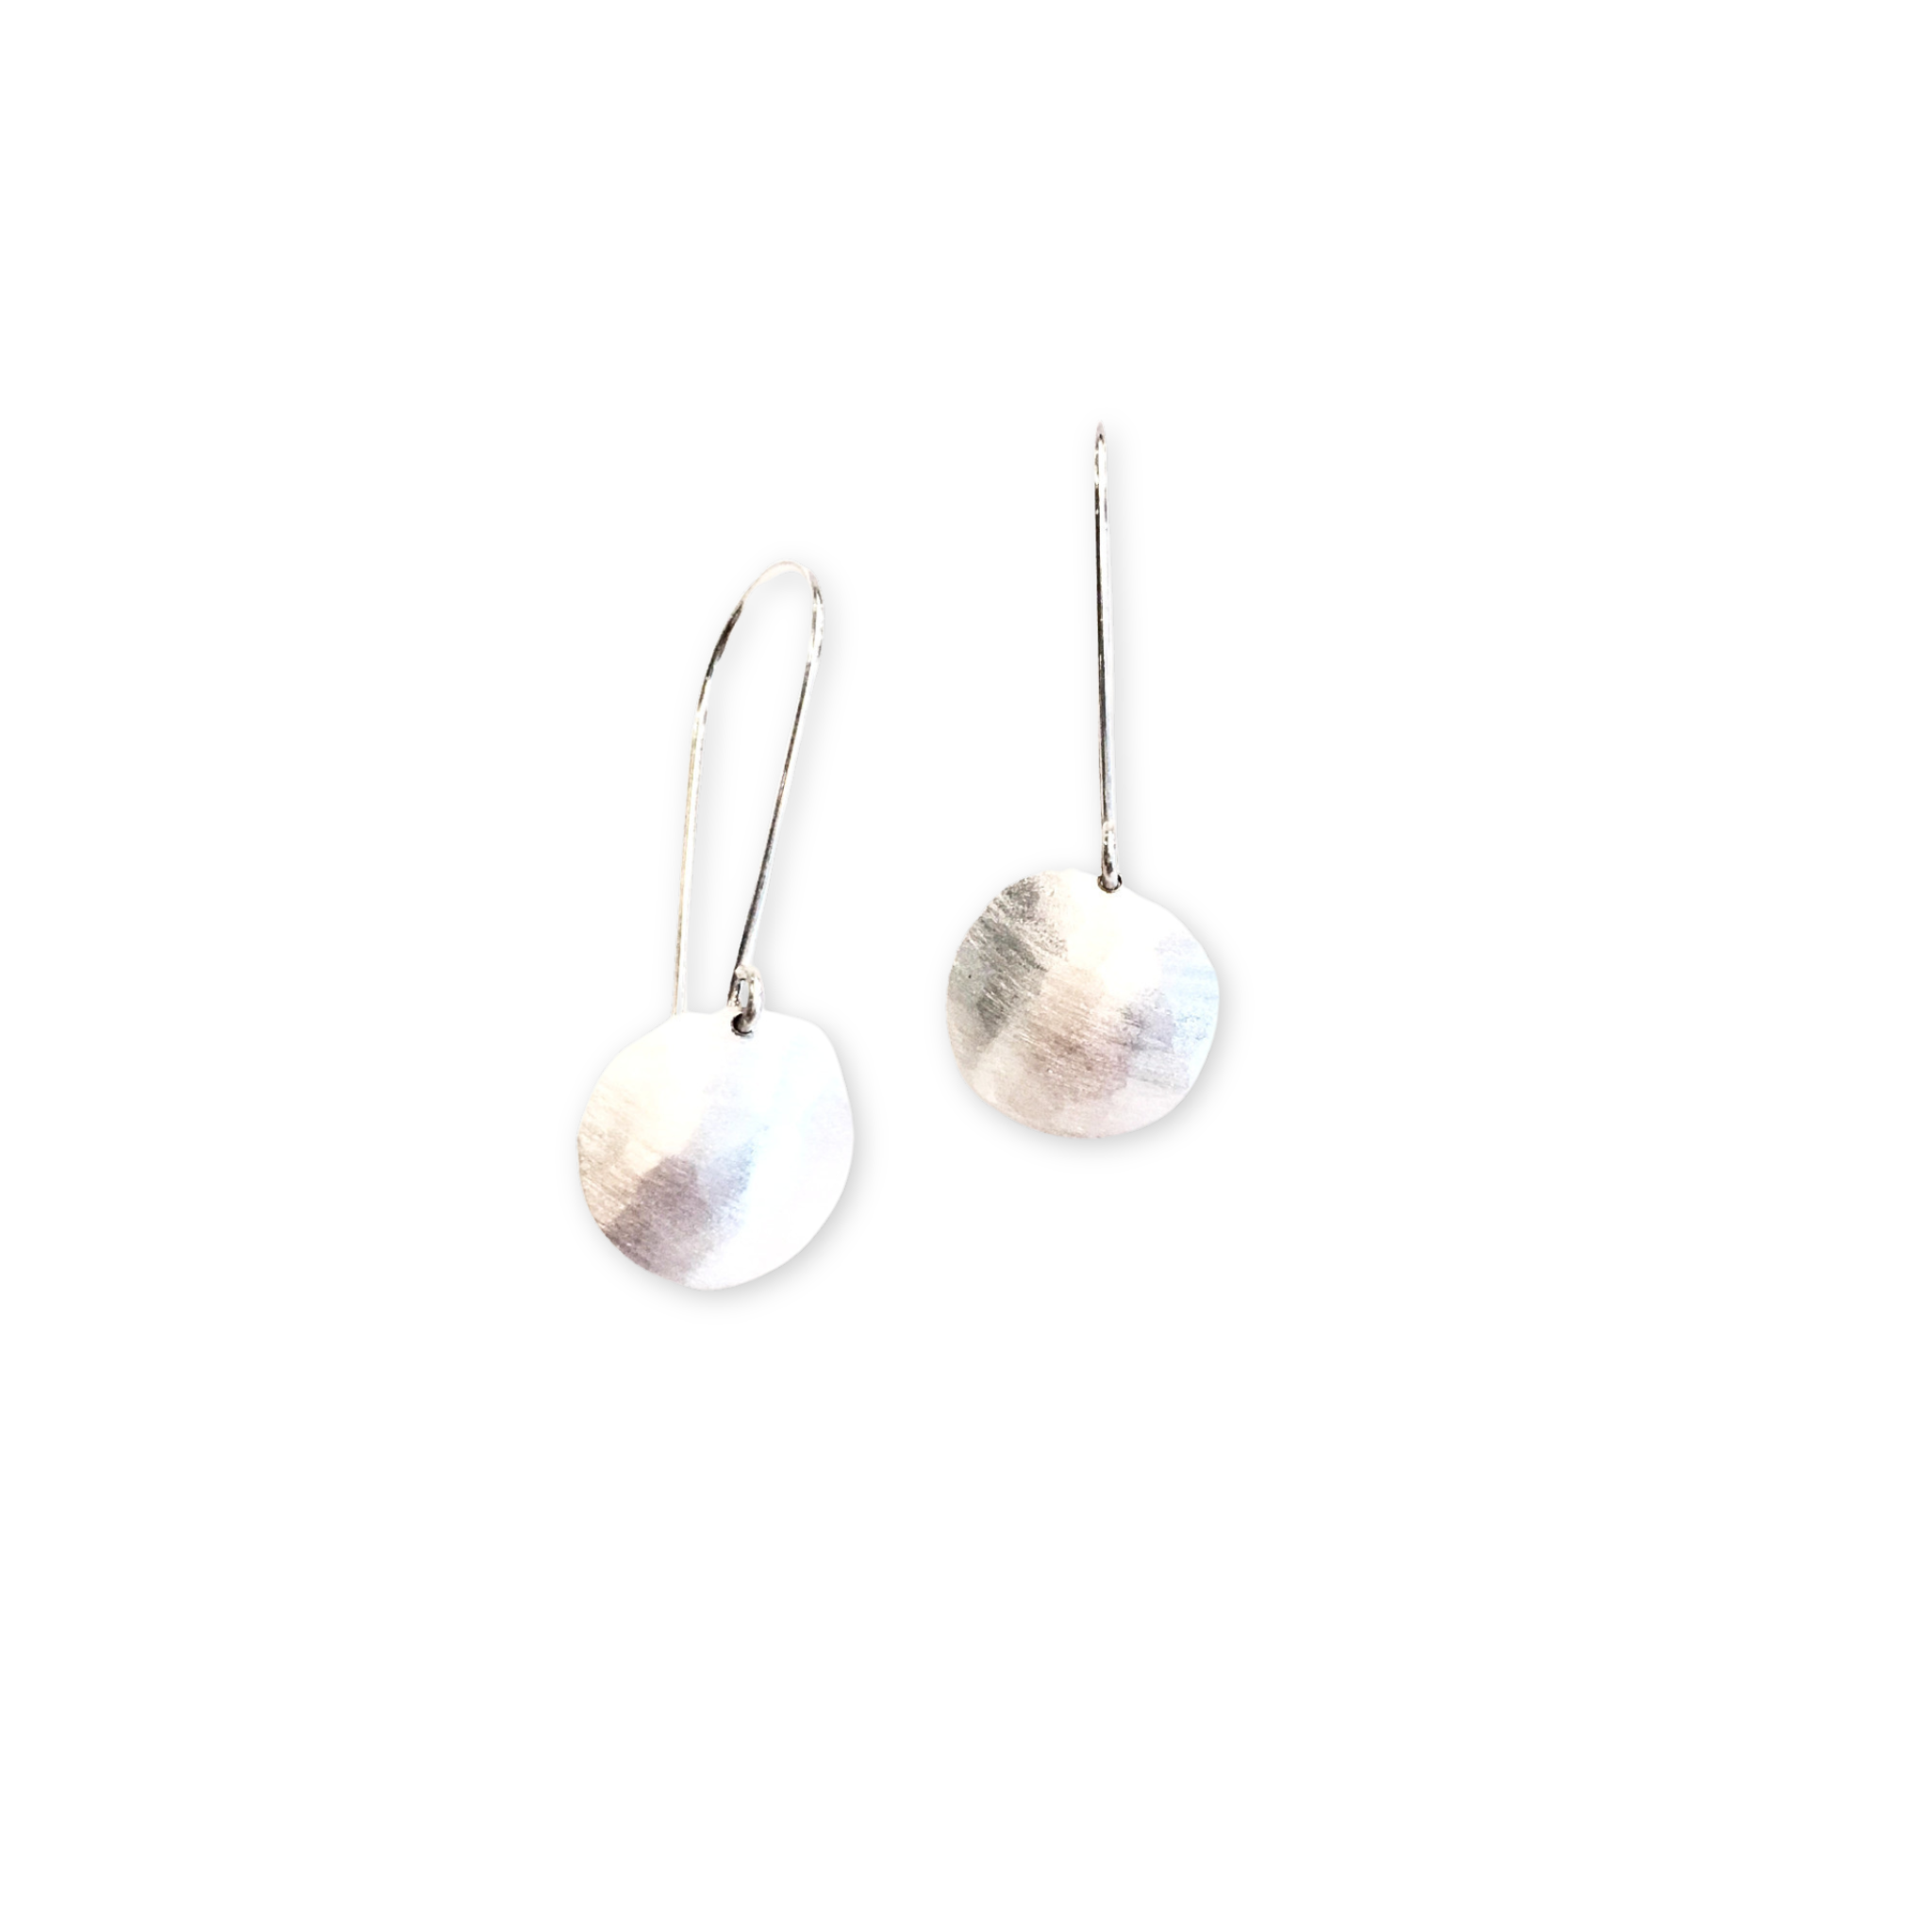 silver earrings with round discs